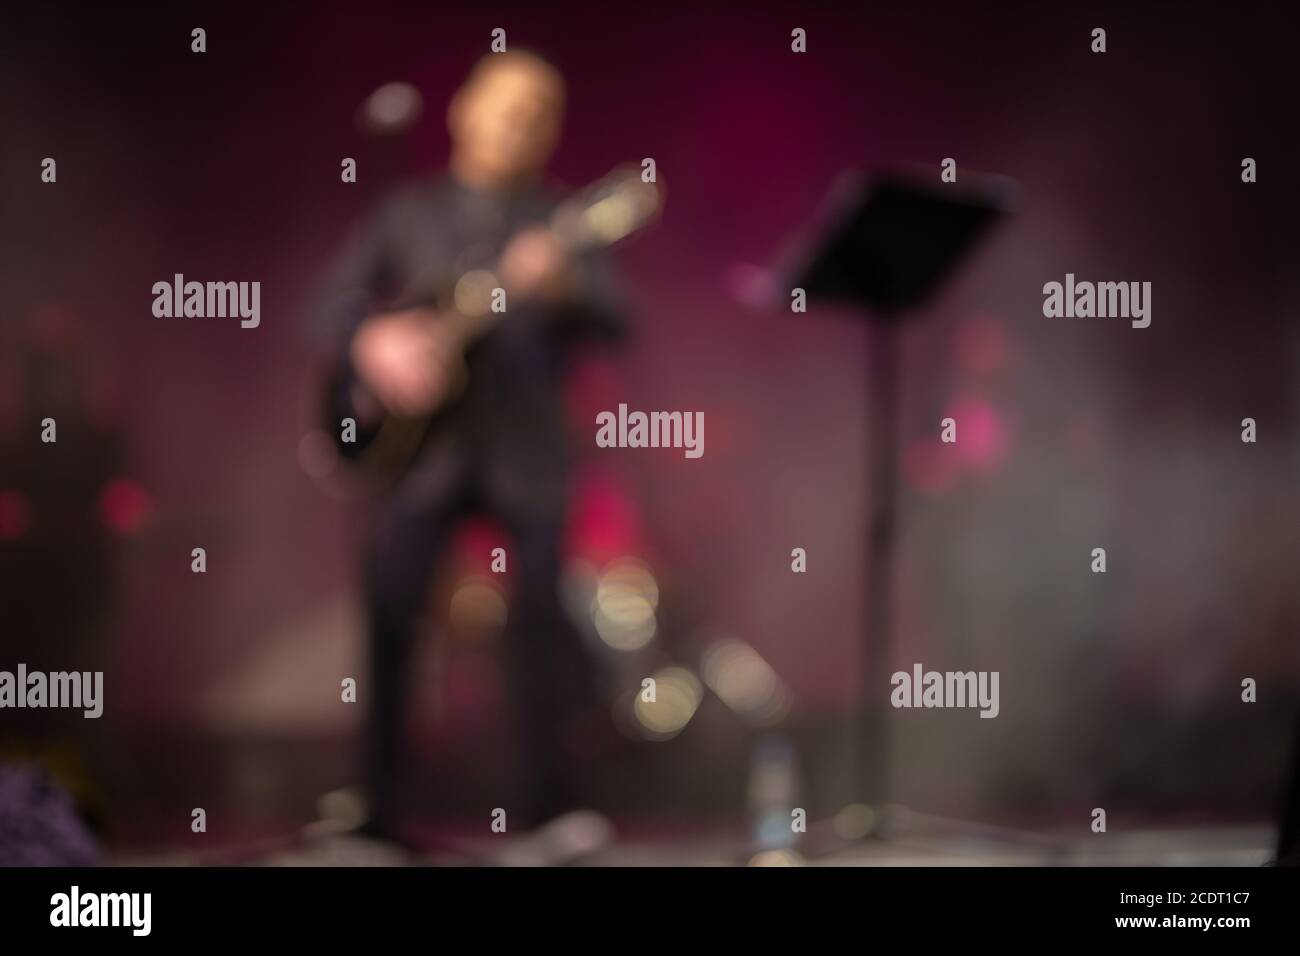 Blur defocus texture, background for design. Singers and musicians perform on stage. Stock Photo